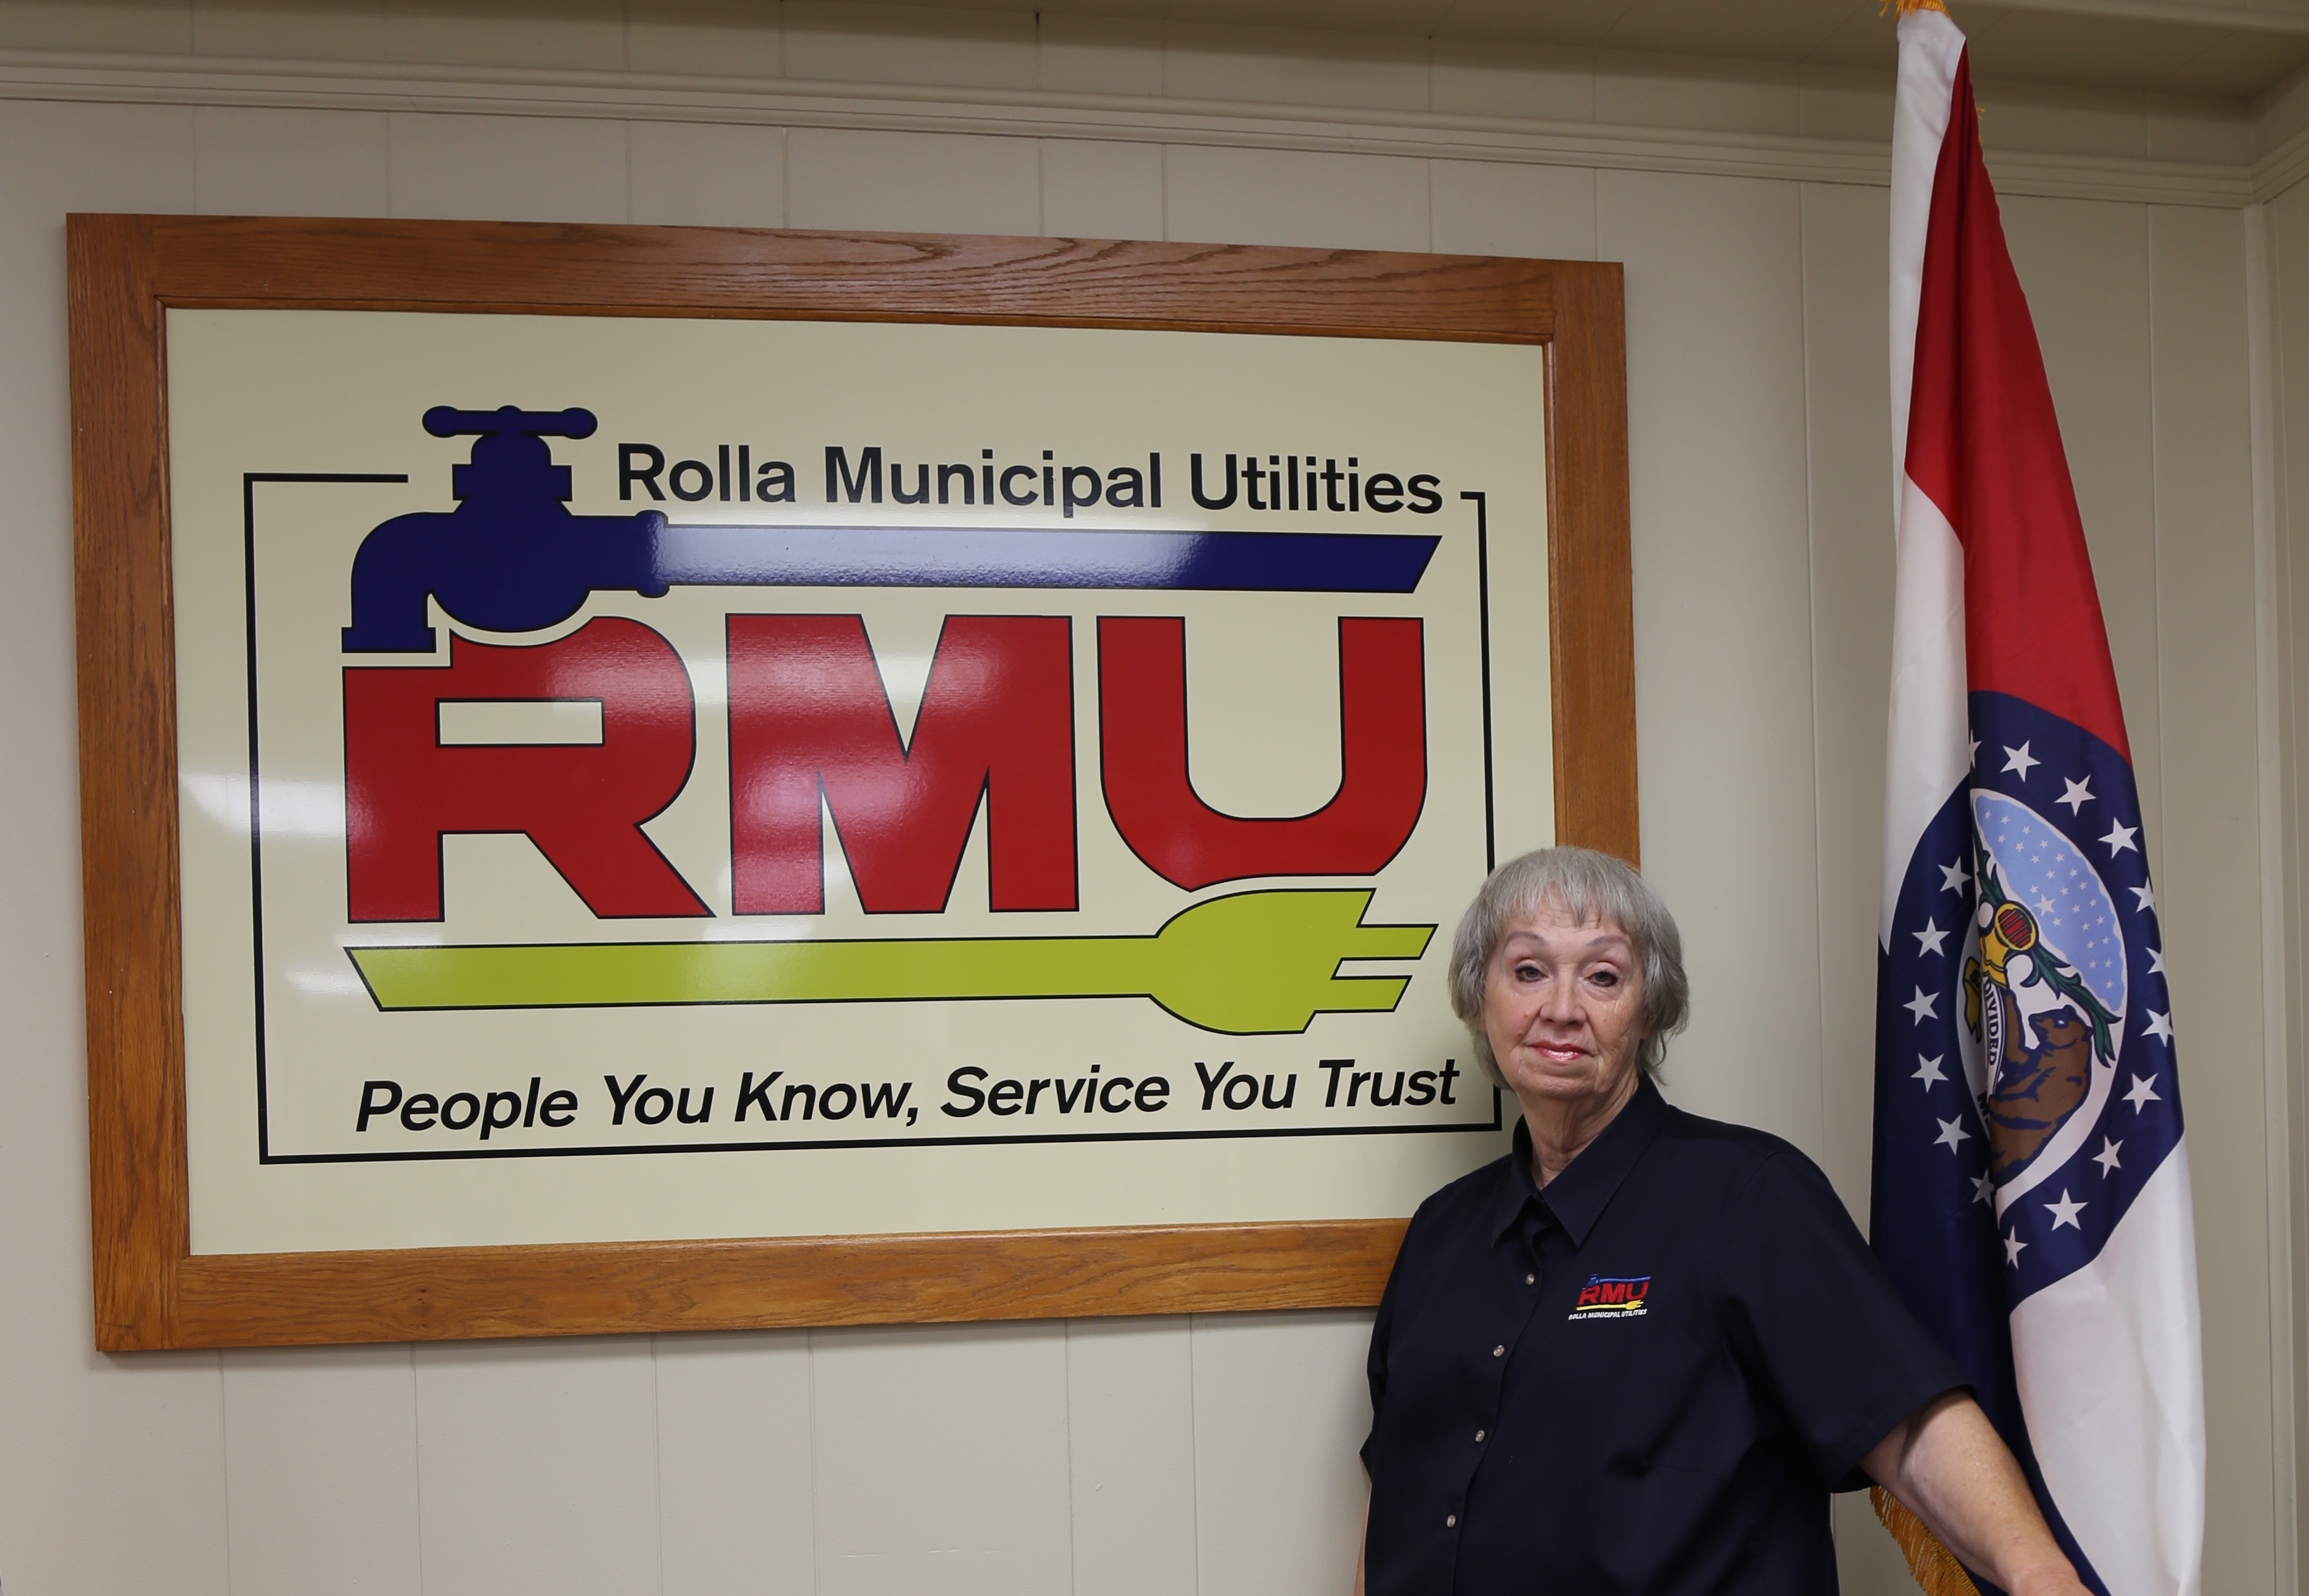 Rosalie Spencer, celebrating 50 years with the Rolla Municipal League